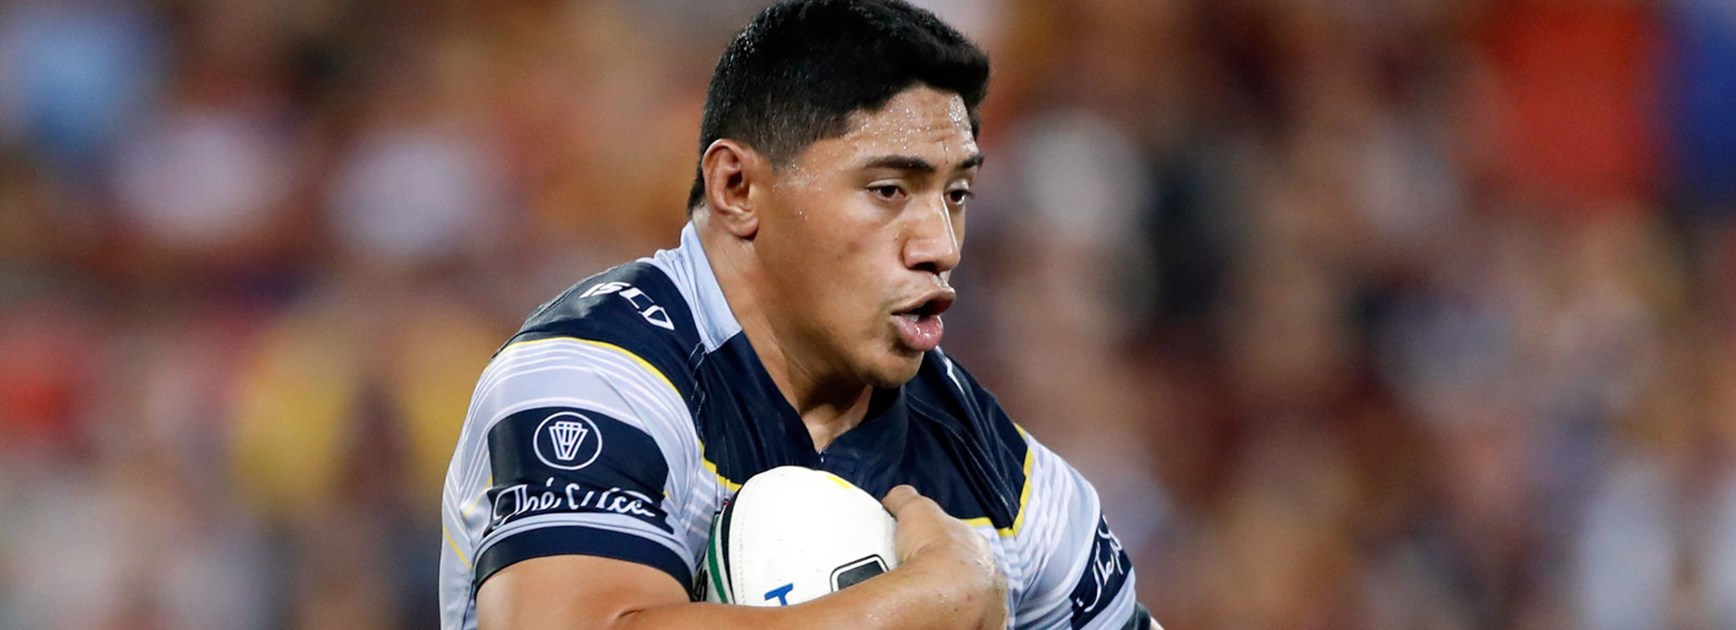 Jason Taumalolo against the Broncos in Round 2.